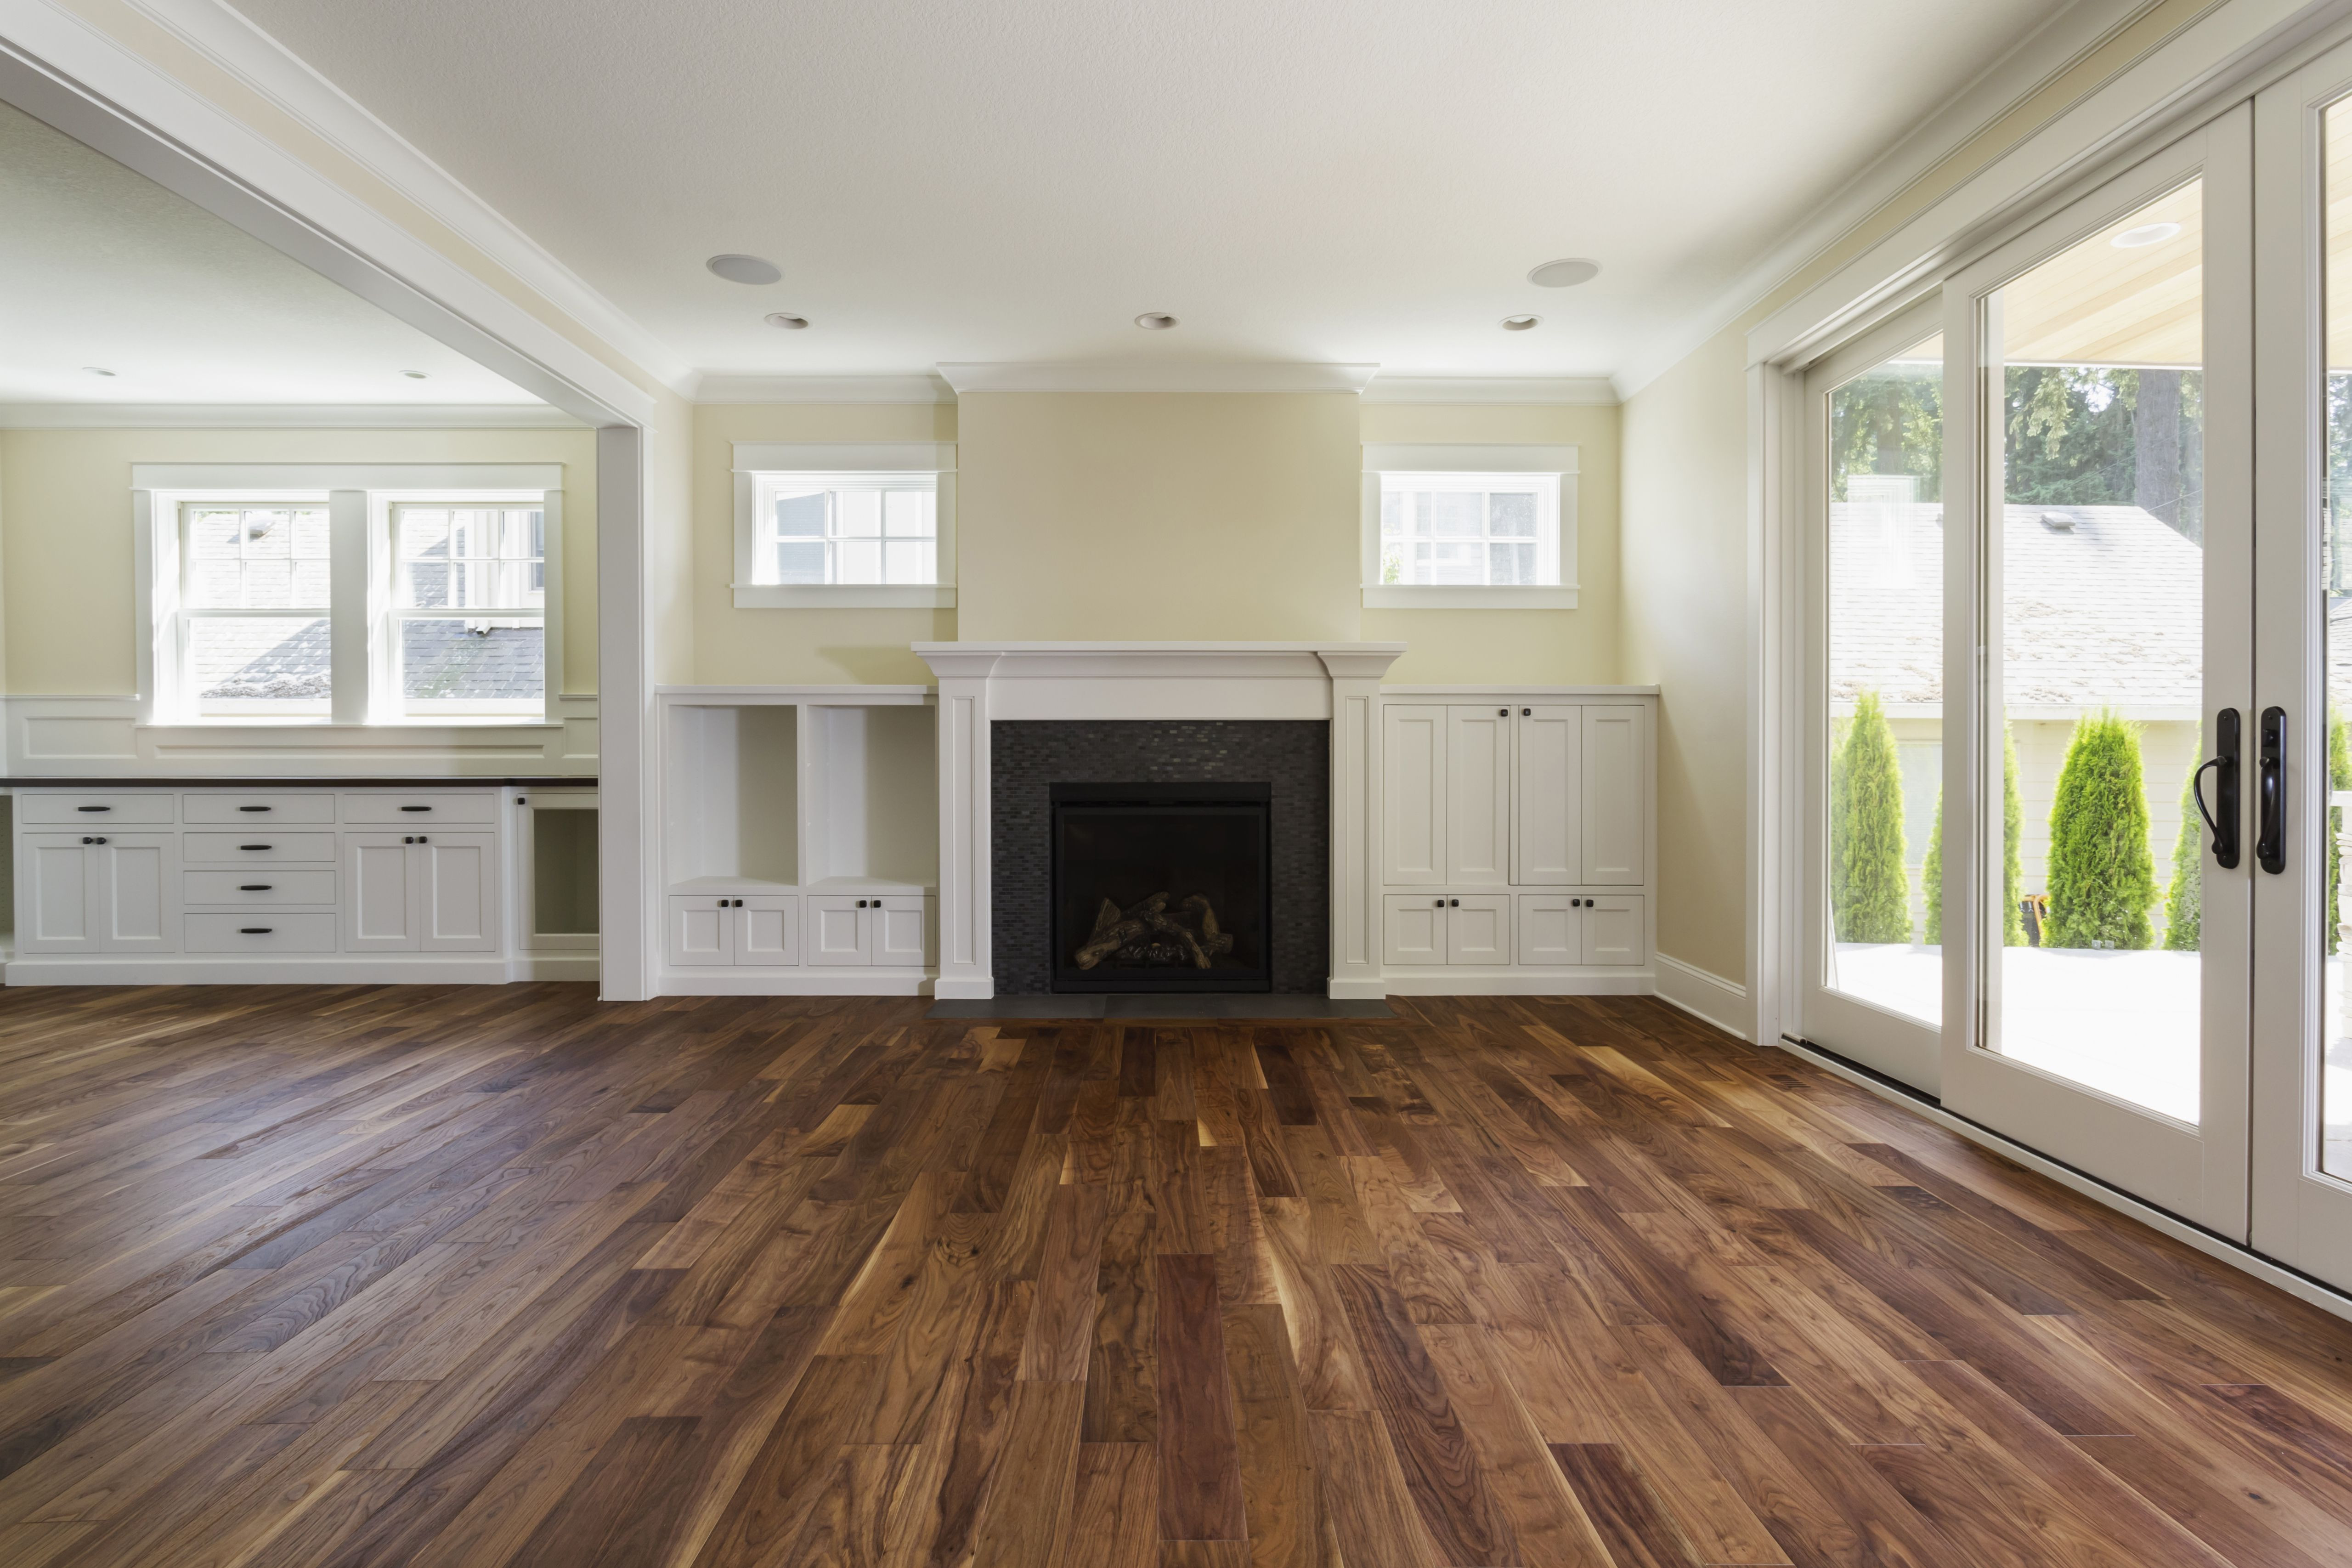 13 Elegant Hardwood Floor Living Room 2024 free download hardwood floor living room of the pros and cons of prefinished hardwood flooring with fireplace and built in shelves in living room 482143011 57bef8e33df78cc16e035397